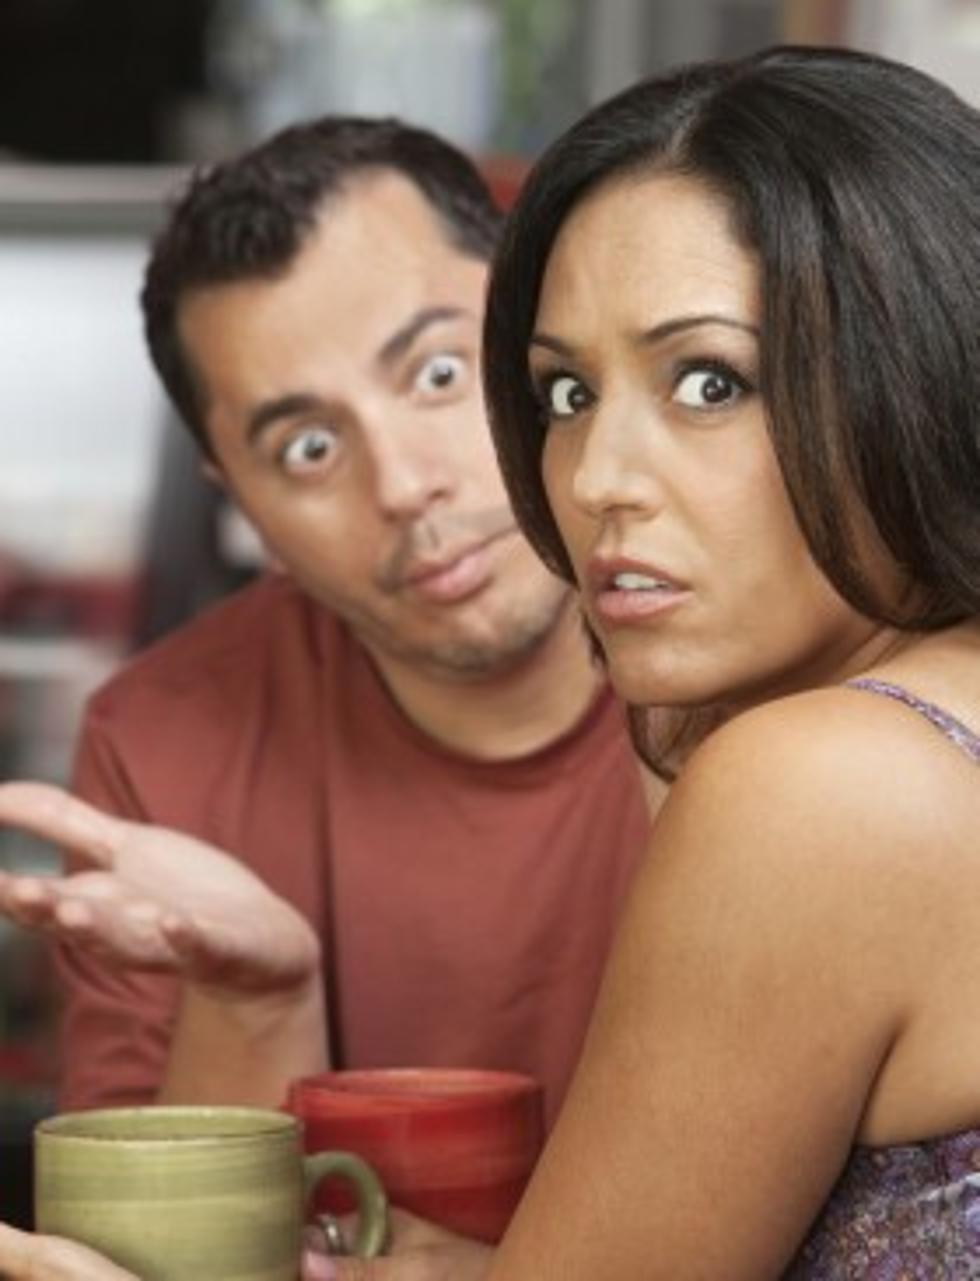 1 in 3 People Said it&#8217;s Their Significant Other&#8217;s Most Irritating Habit? IMPOSSIBLE TRIVIA